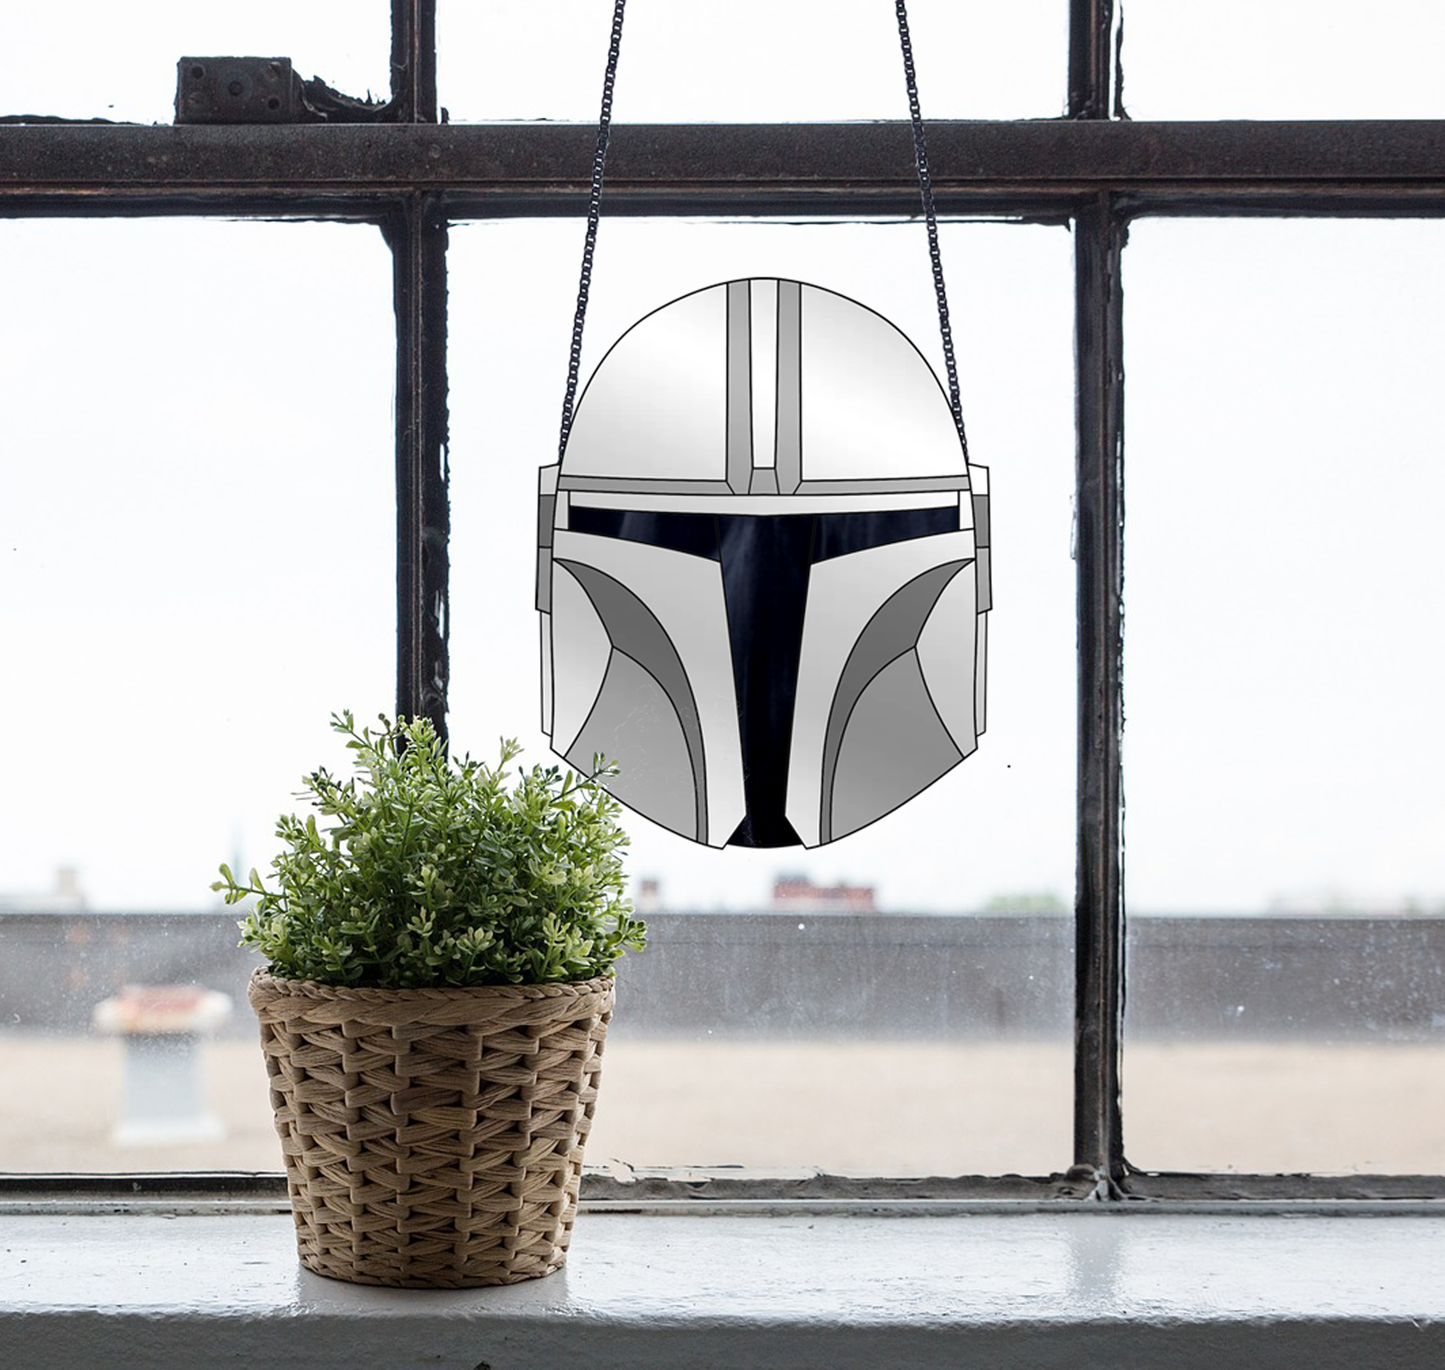 The Mandalorian Star Wars helmet stained glass pattern, instant pdf download, shown in window with plant